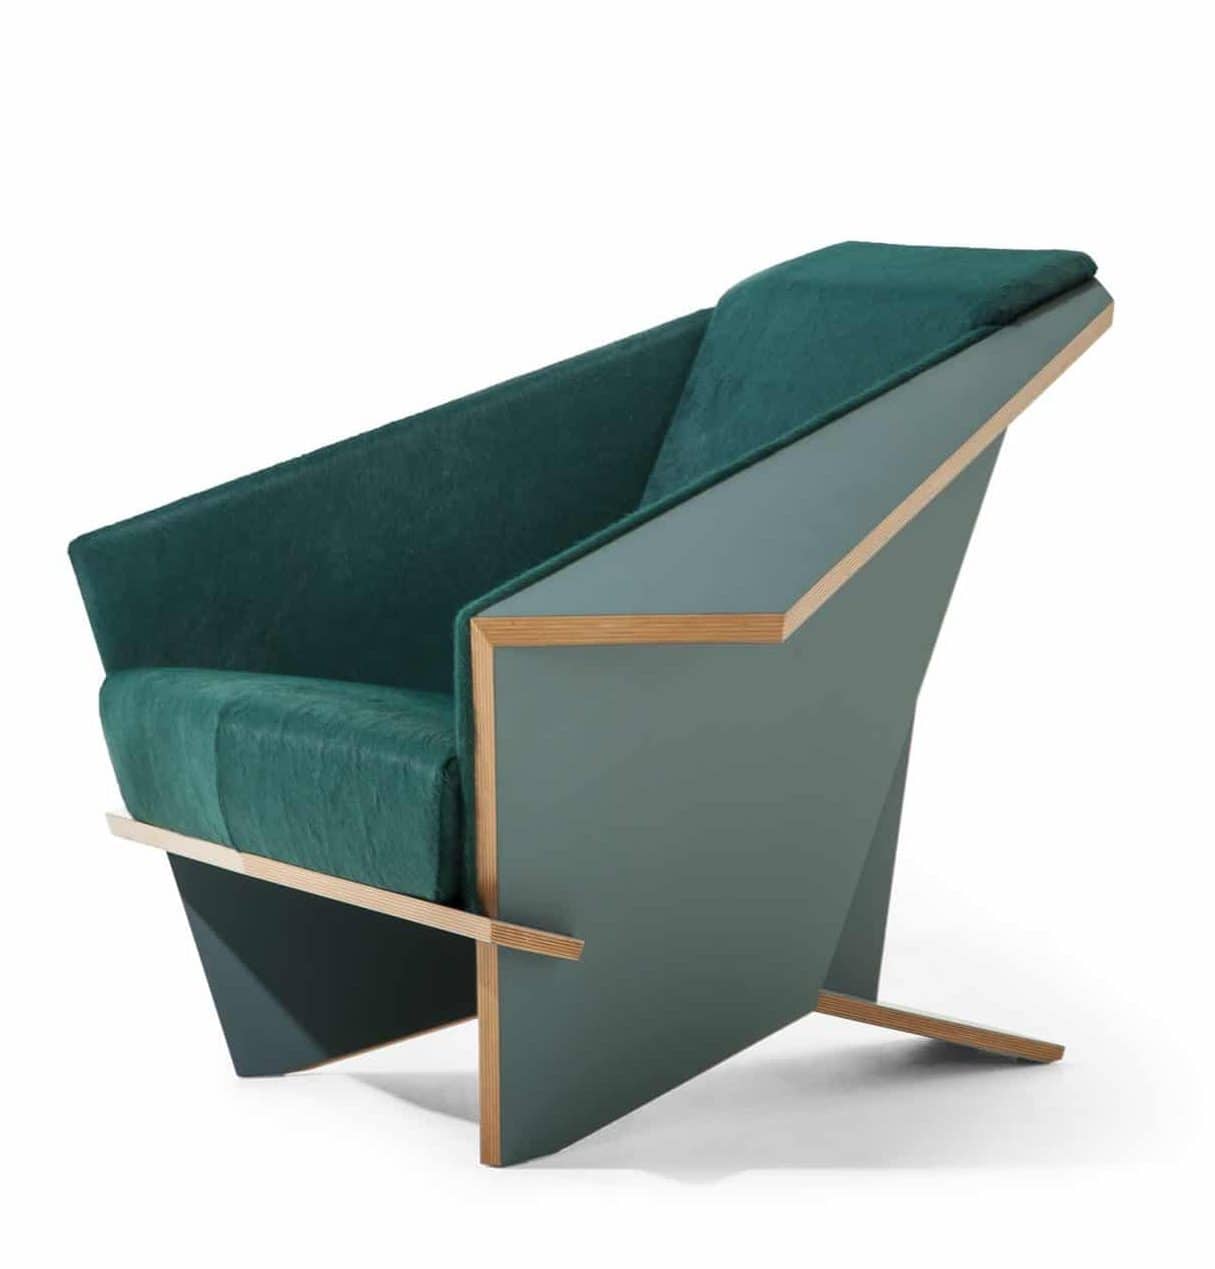 The Taliesin Origami Chair by Frank Lloyd Wright , 1949: A green-blue chair with a tan accent along the edge. 